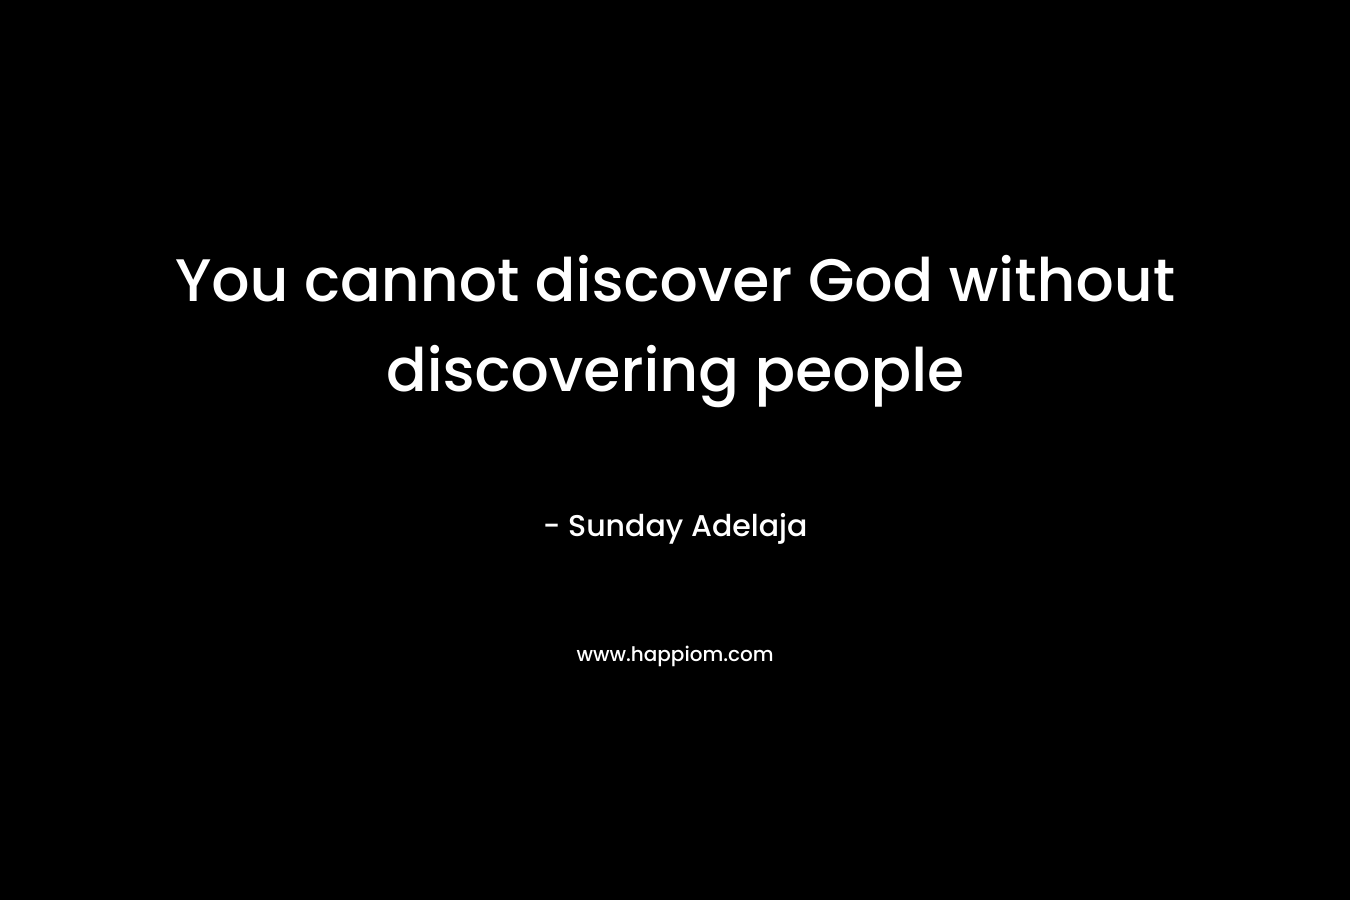 You cannot discover God without discovering people